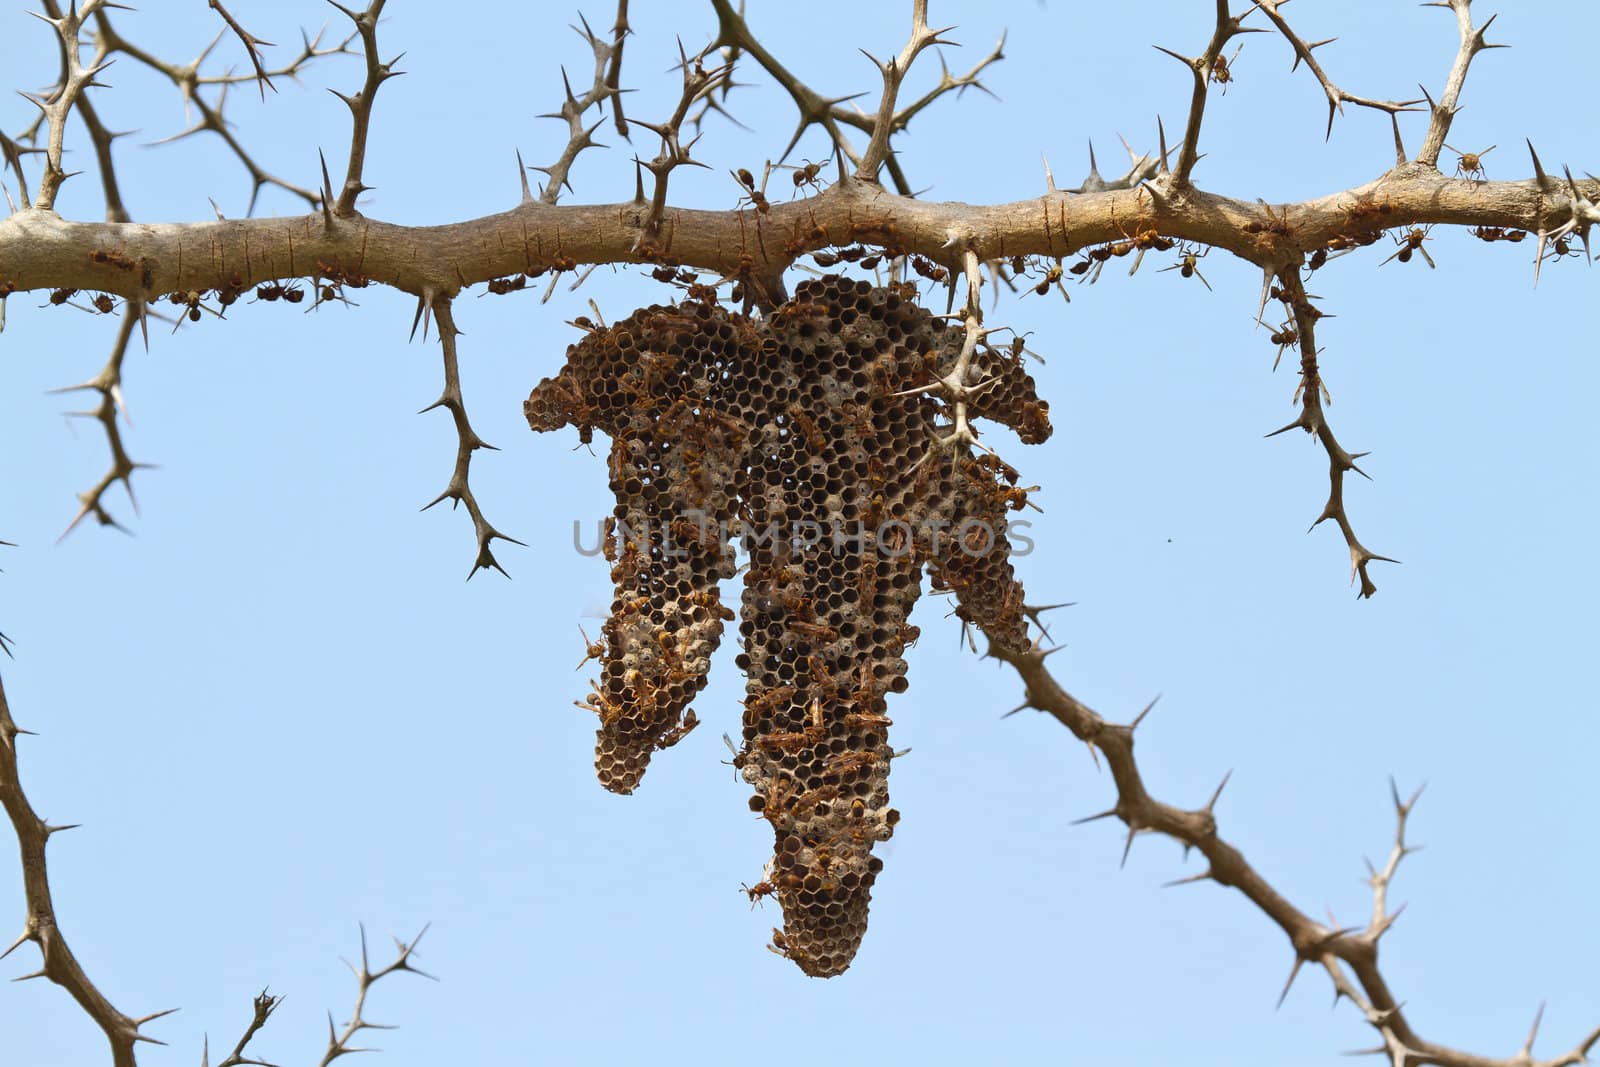 Wasp Nest in The Gambia by SueRob